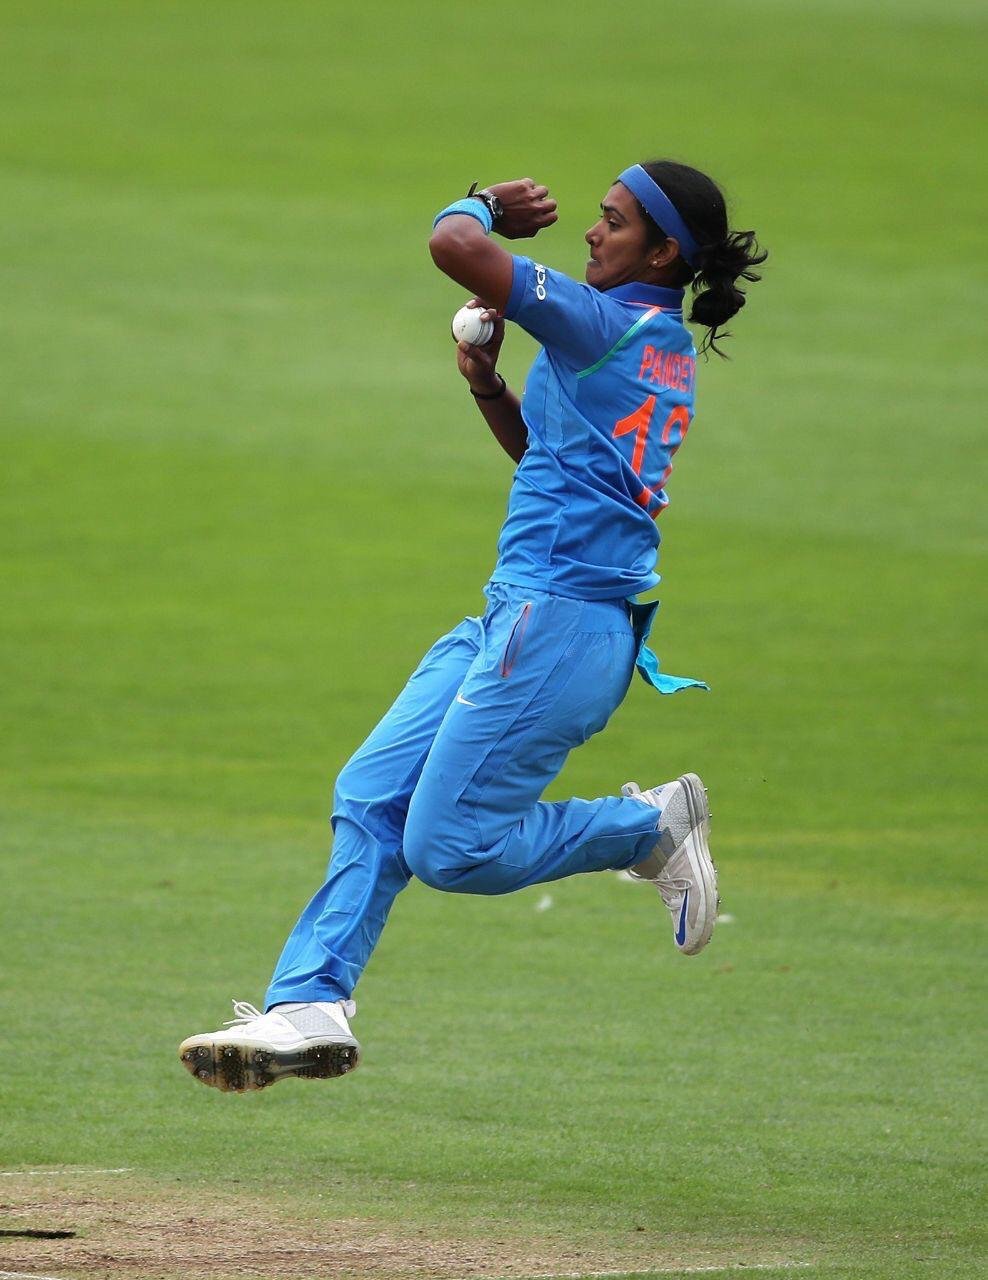 Women’s cricket needs marketing and investment more than rule changes, states Shikha Pandey